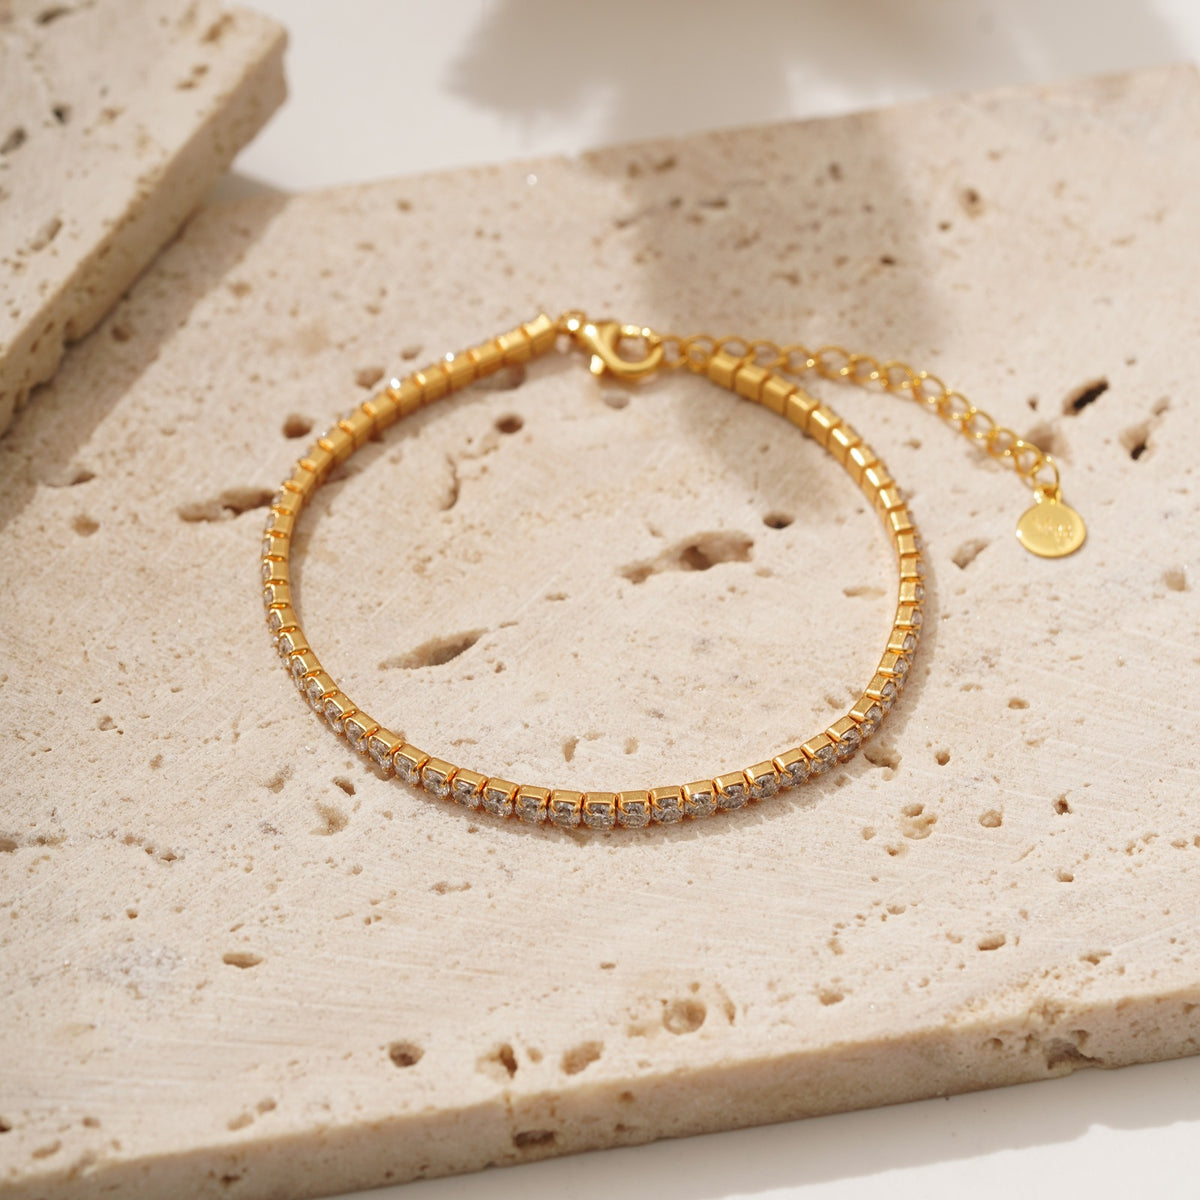 Crafted with meticulous precision, the Billie Tennis Bracelet showcases a seamless row of meticulously set gemstones that radiate brilliance and sparkle. Each stone, like a perfectly struck tennis ball, captures the essence of Billie Jean King's unwavering focus and unwavering determination on the court.